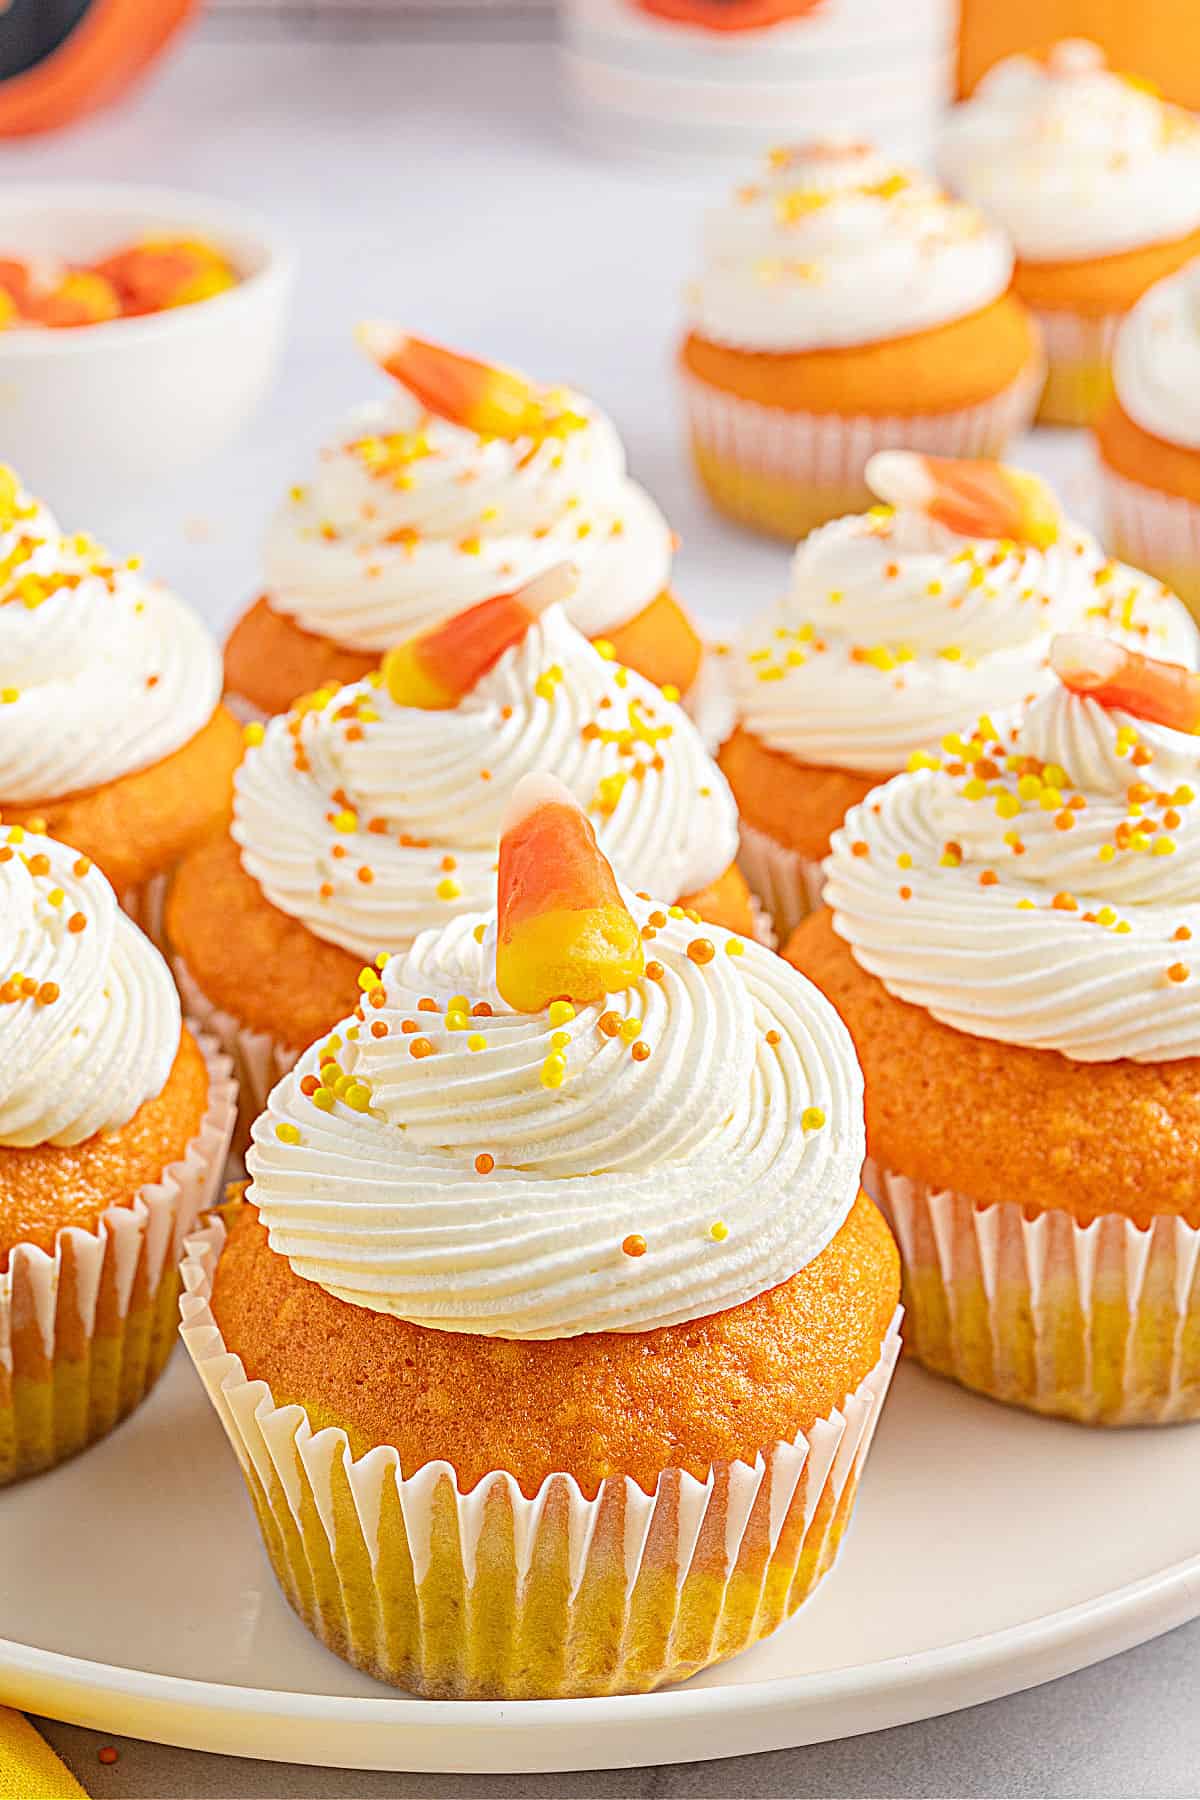 Candy corn cupcakes arranged on a white platter to serve.